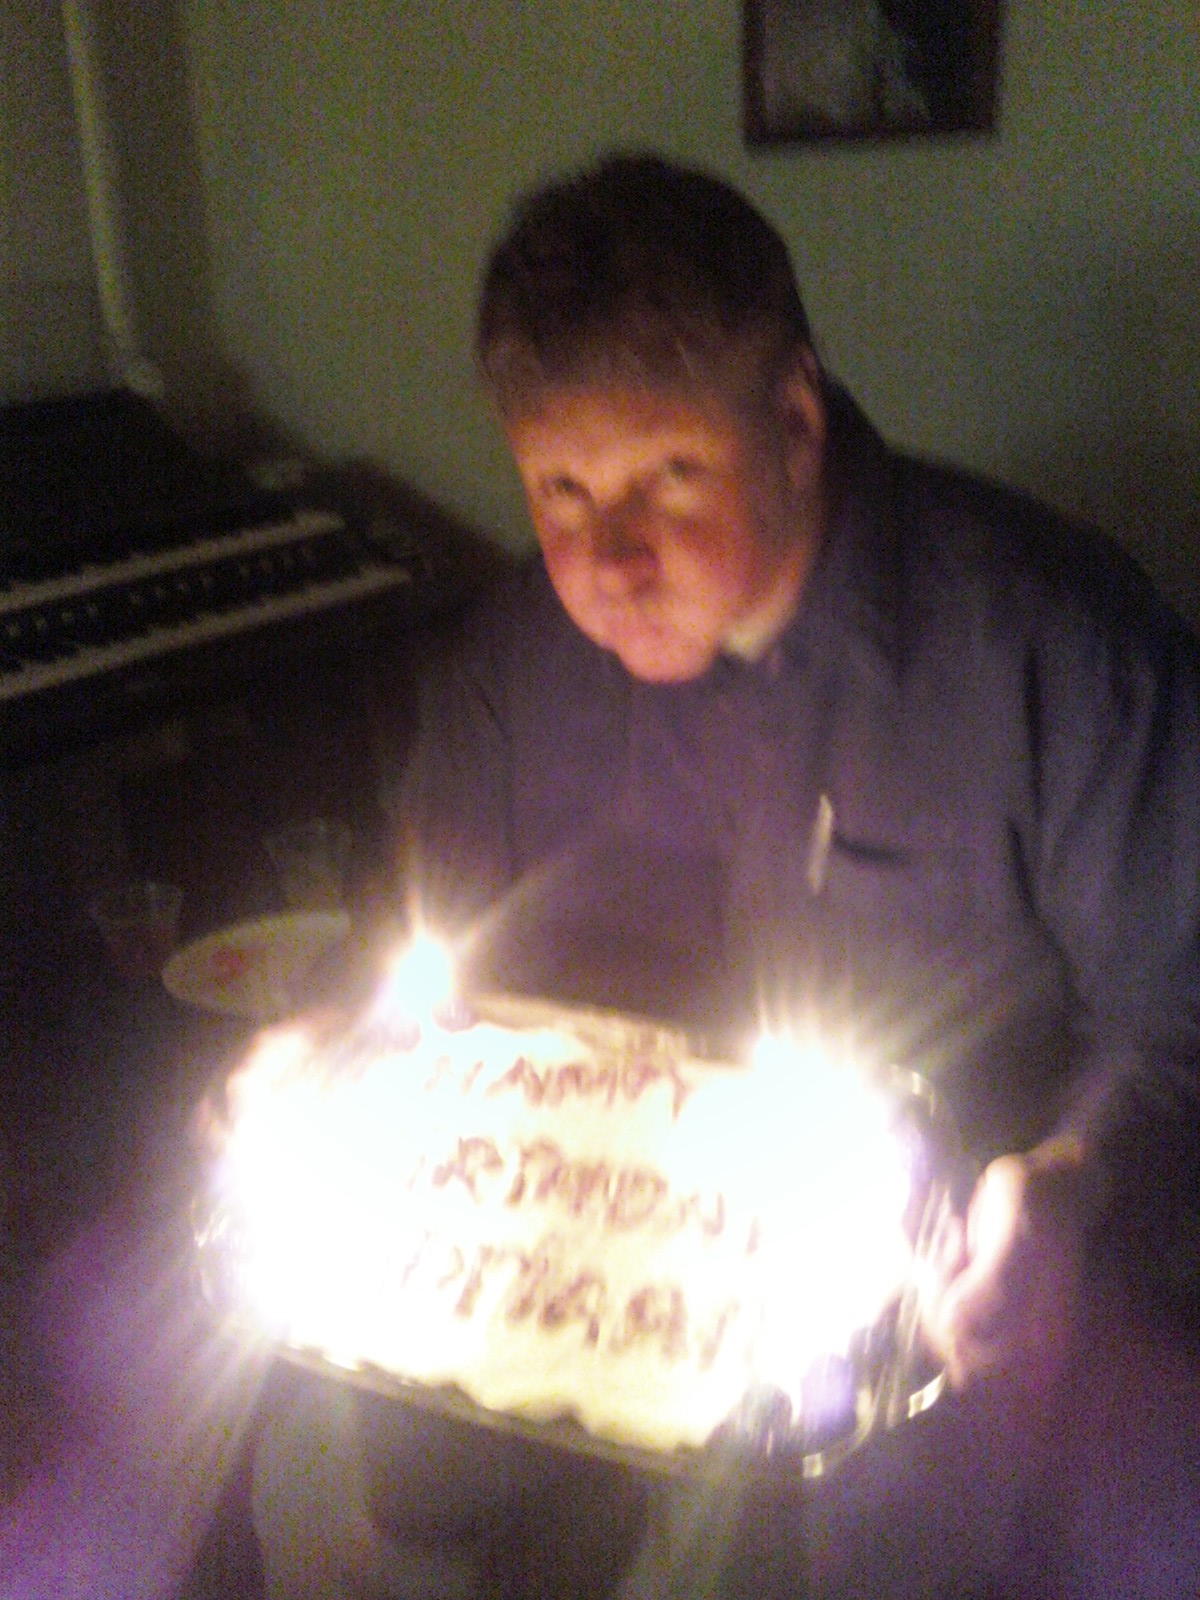 adriaan blow's out the candles